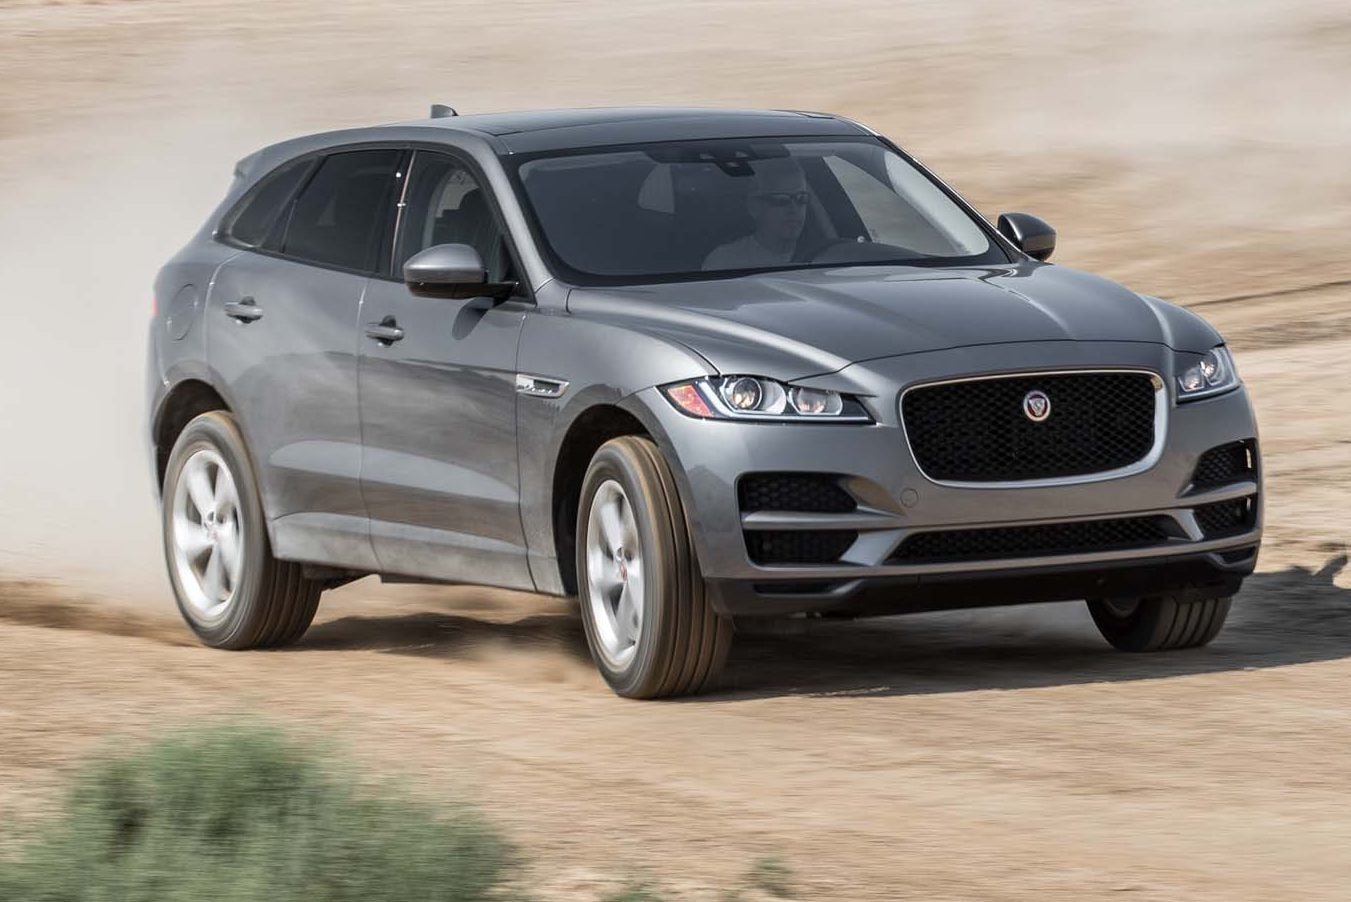 2017 Jaguar F-Pace First Test: The Sports Car of SUVs